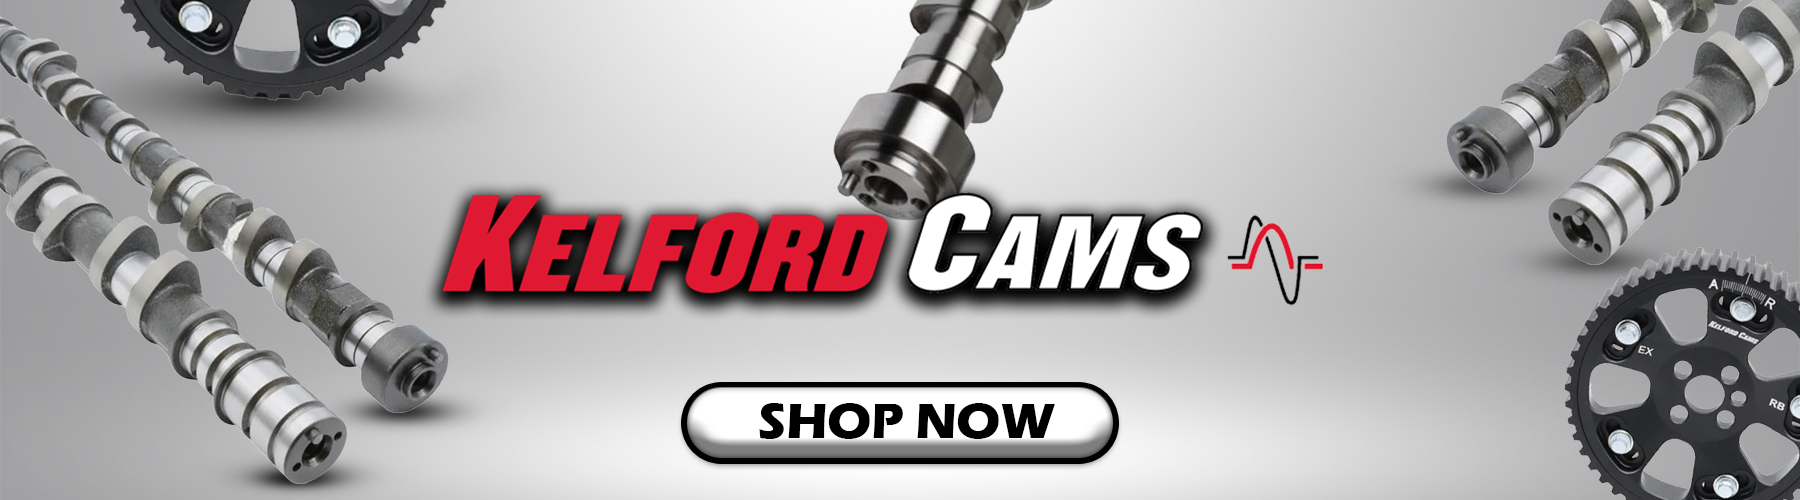 Kelford Cams Product Collection